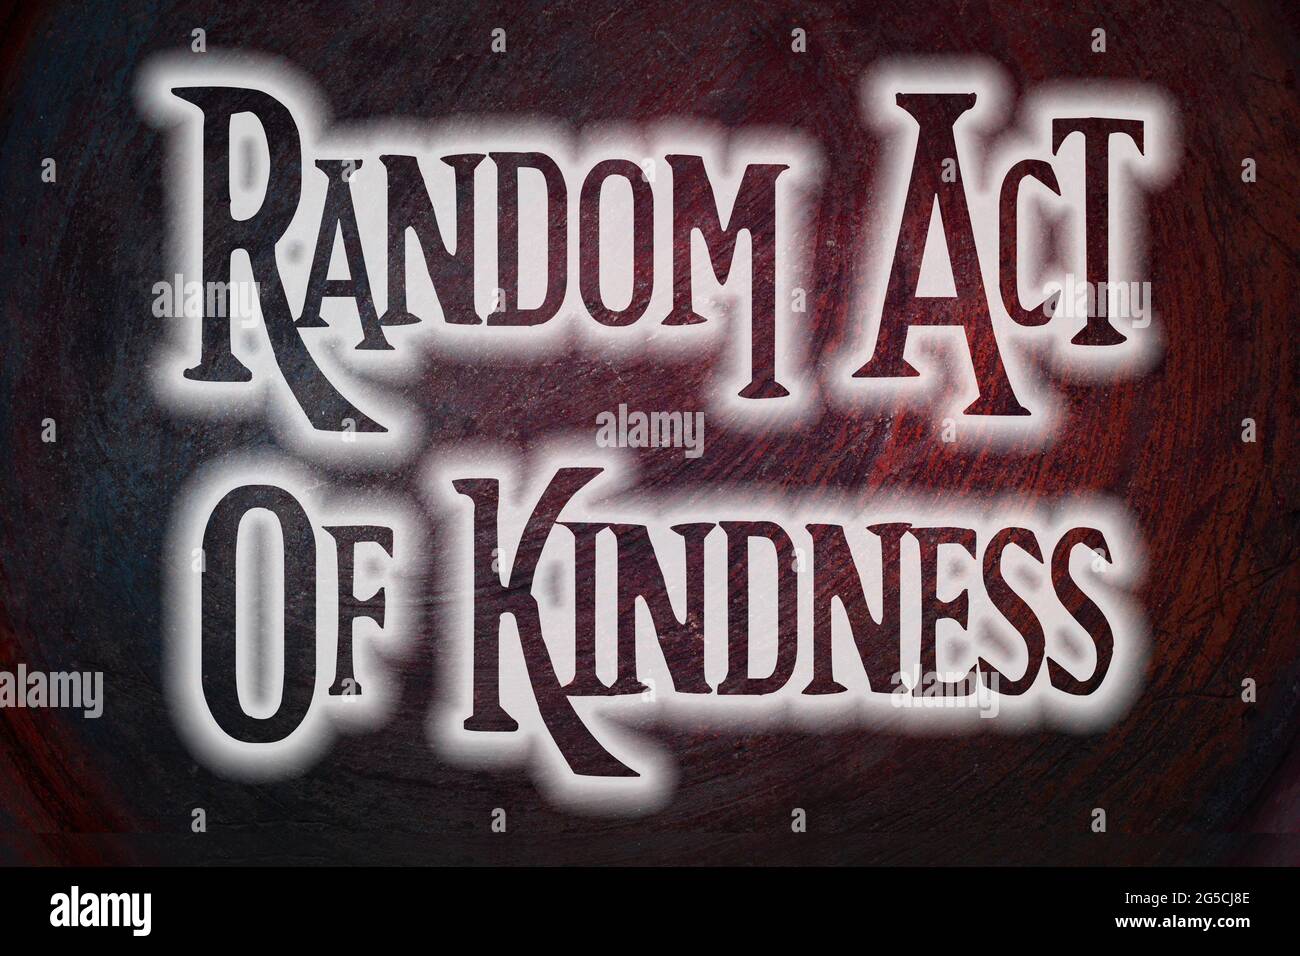 Random Act Of Kindness Concept text on background Stock Photo